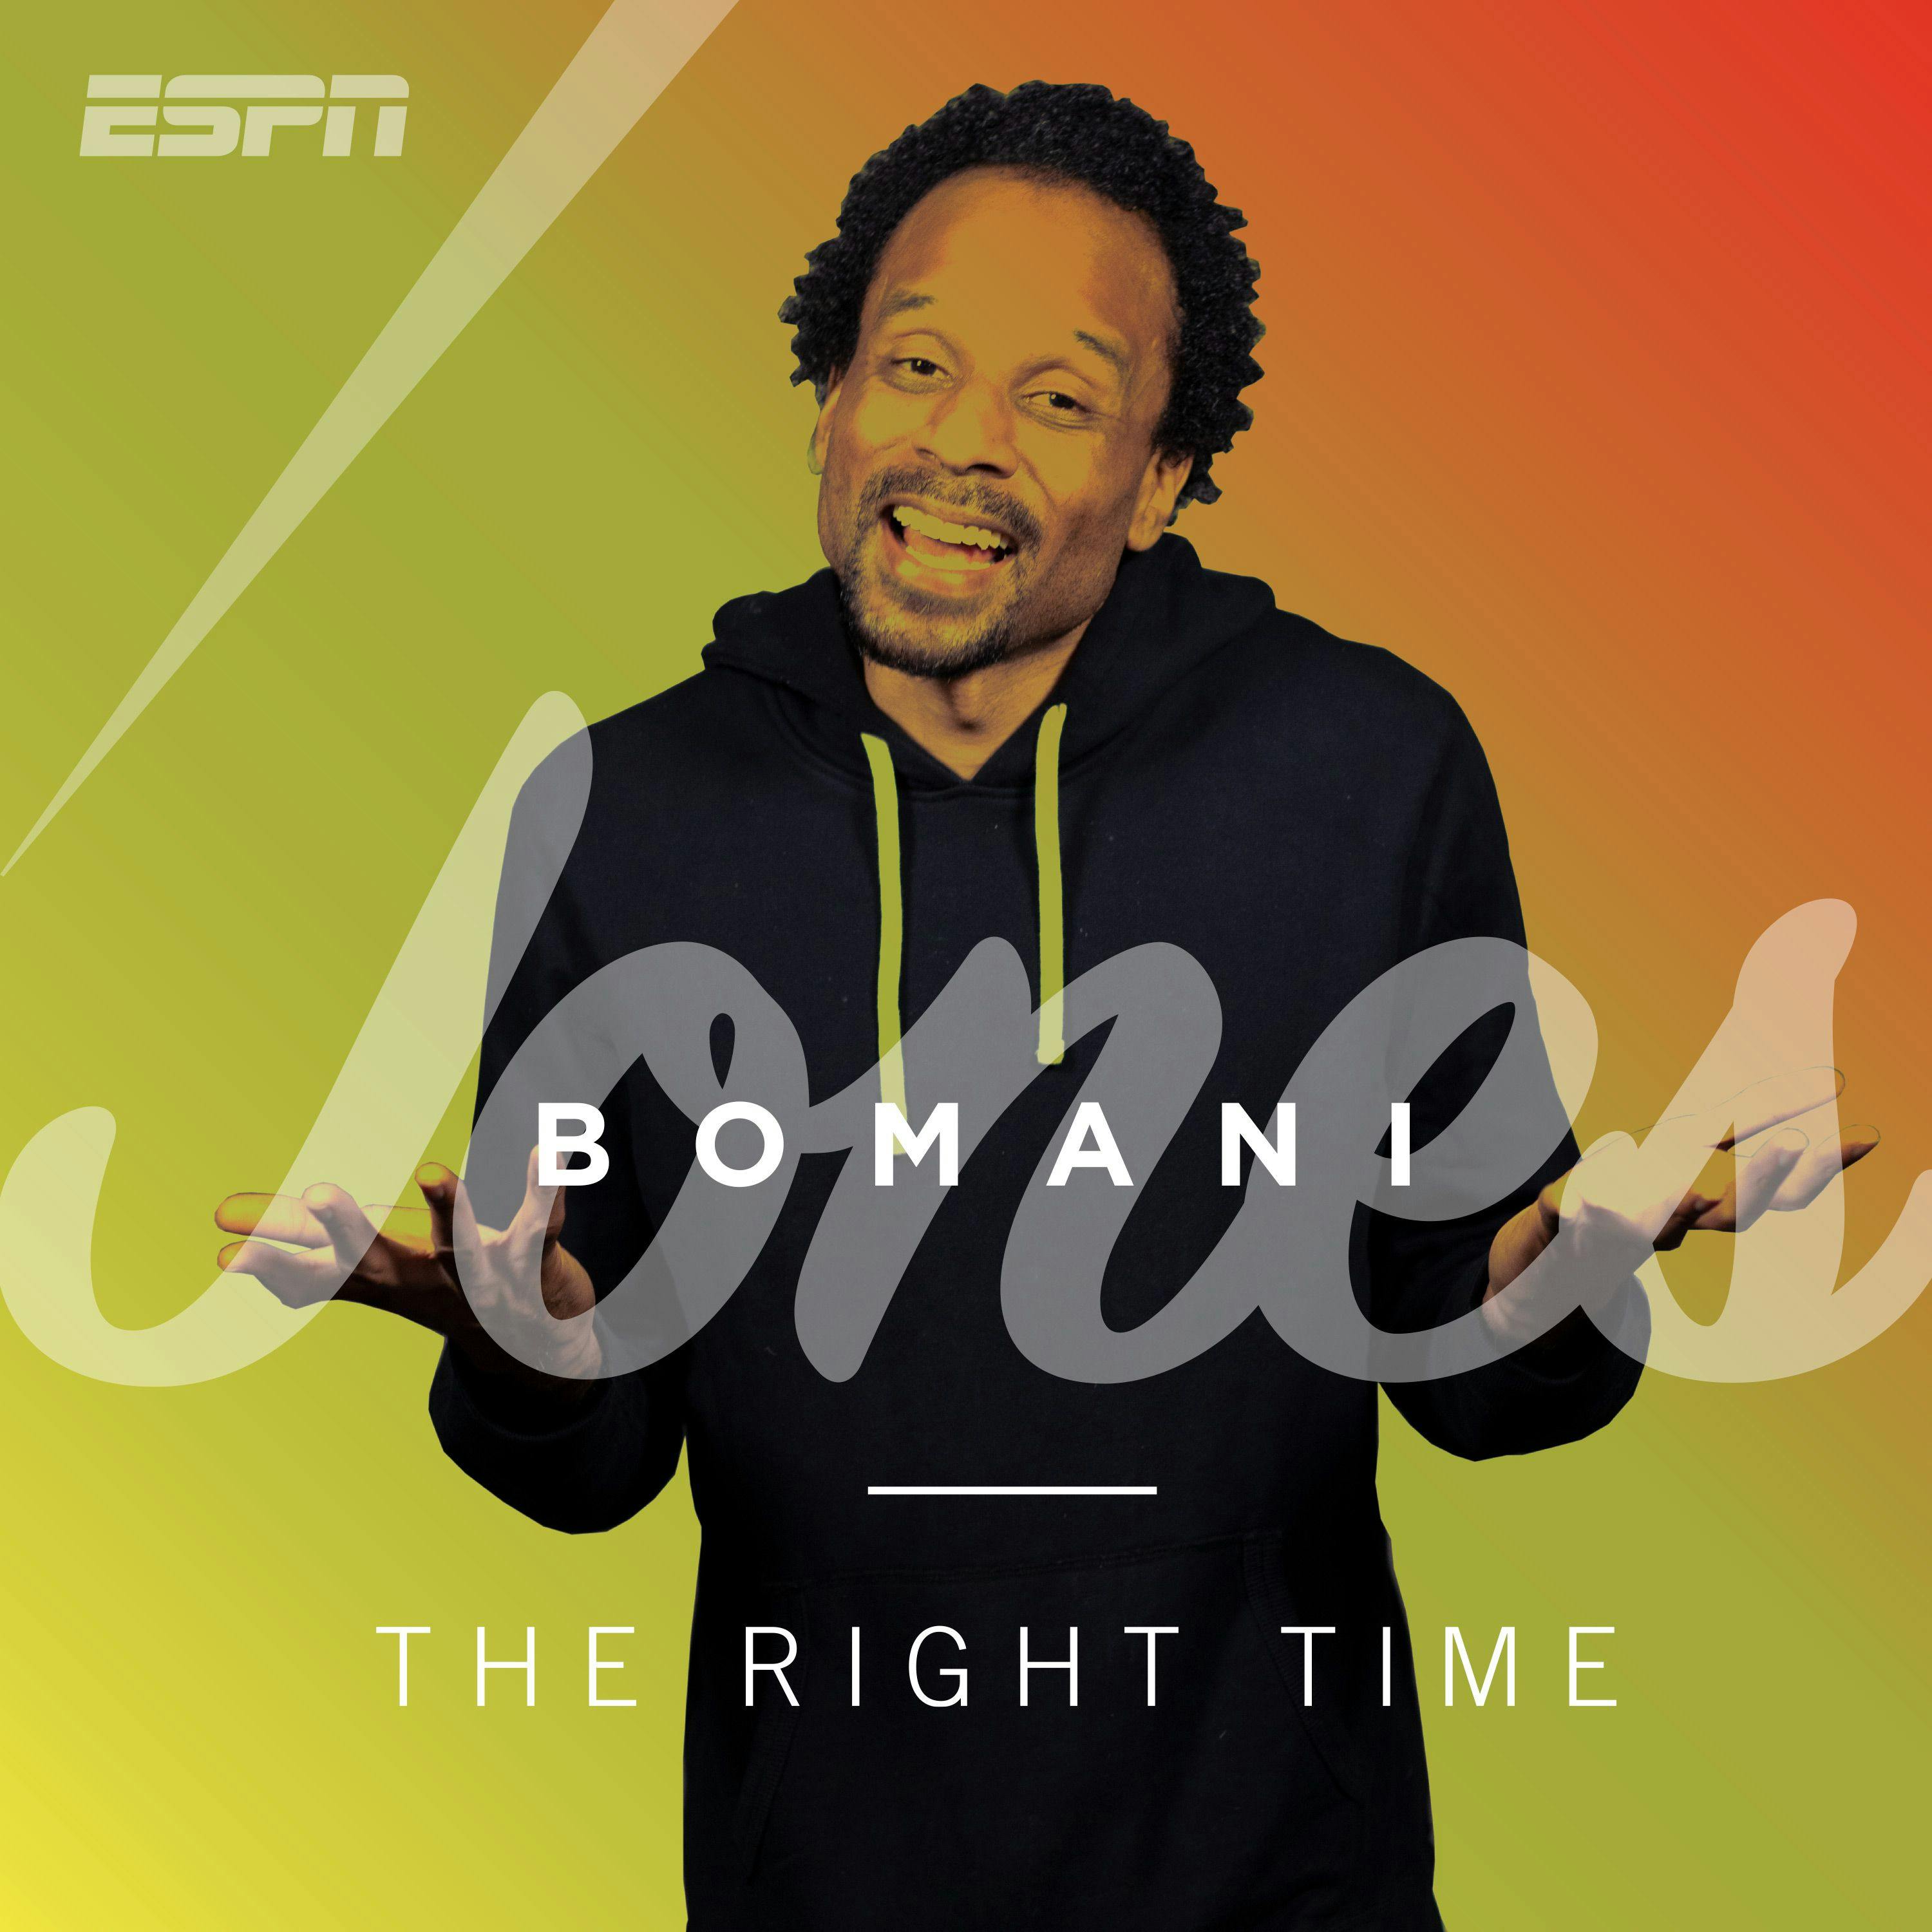 Horse And Girl Sex Veadio Hd Dounlod - The Right Time with Bomani Jones Show - PodCenter - ESPN Radio